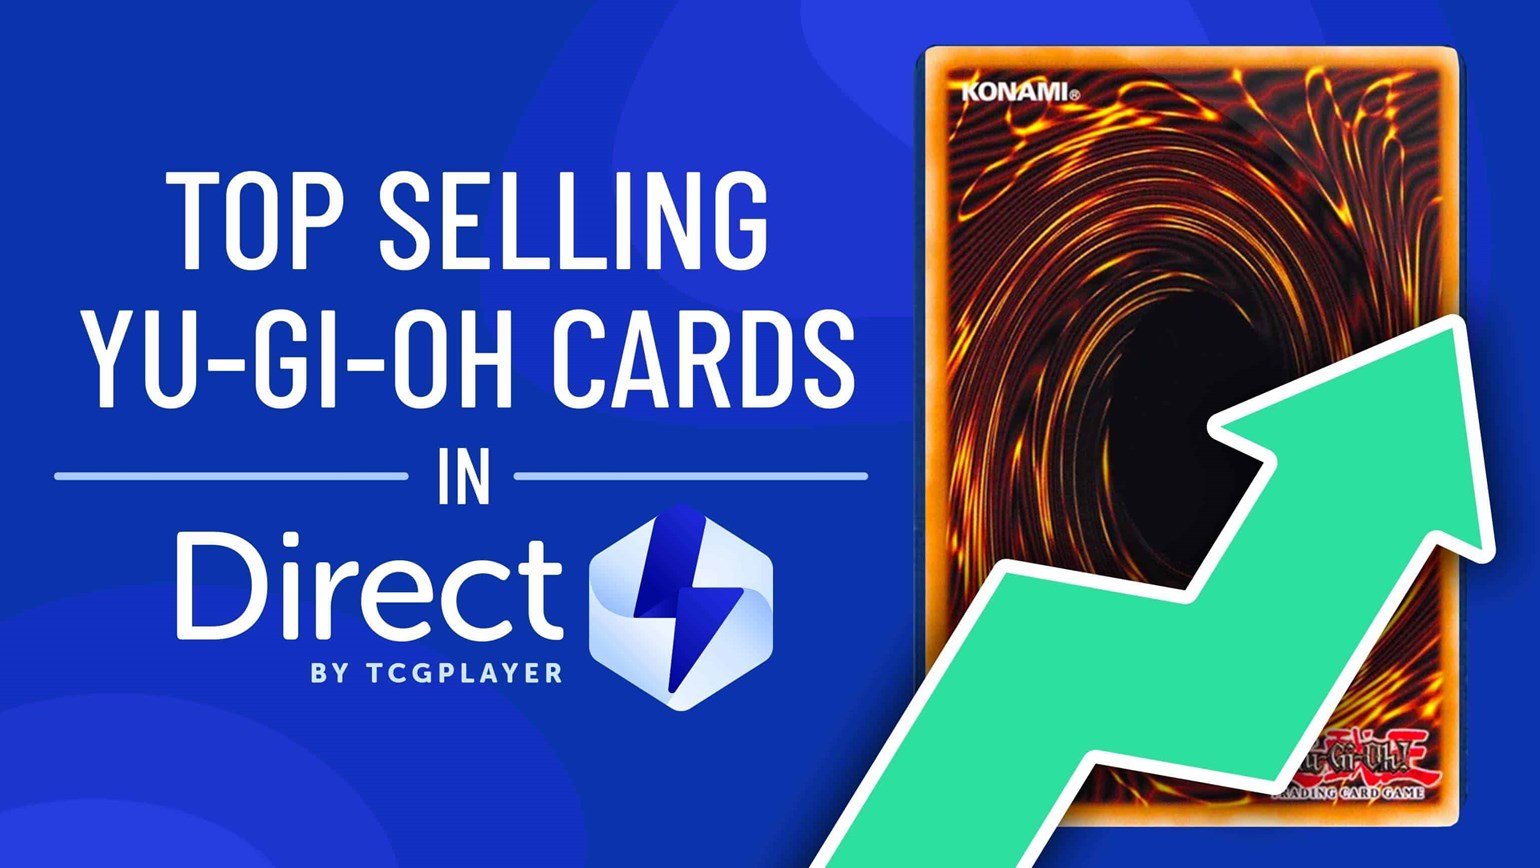 December Top Selling Yu-Gi-Oh! Cards in Direct by TCGplayer